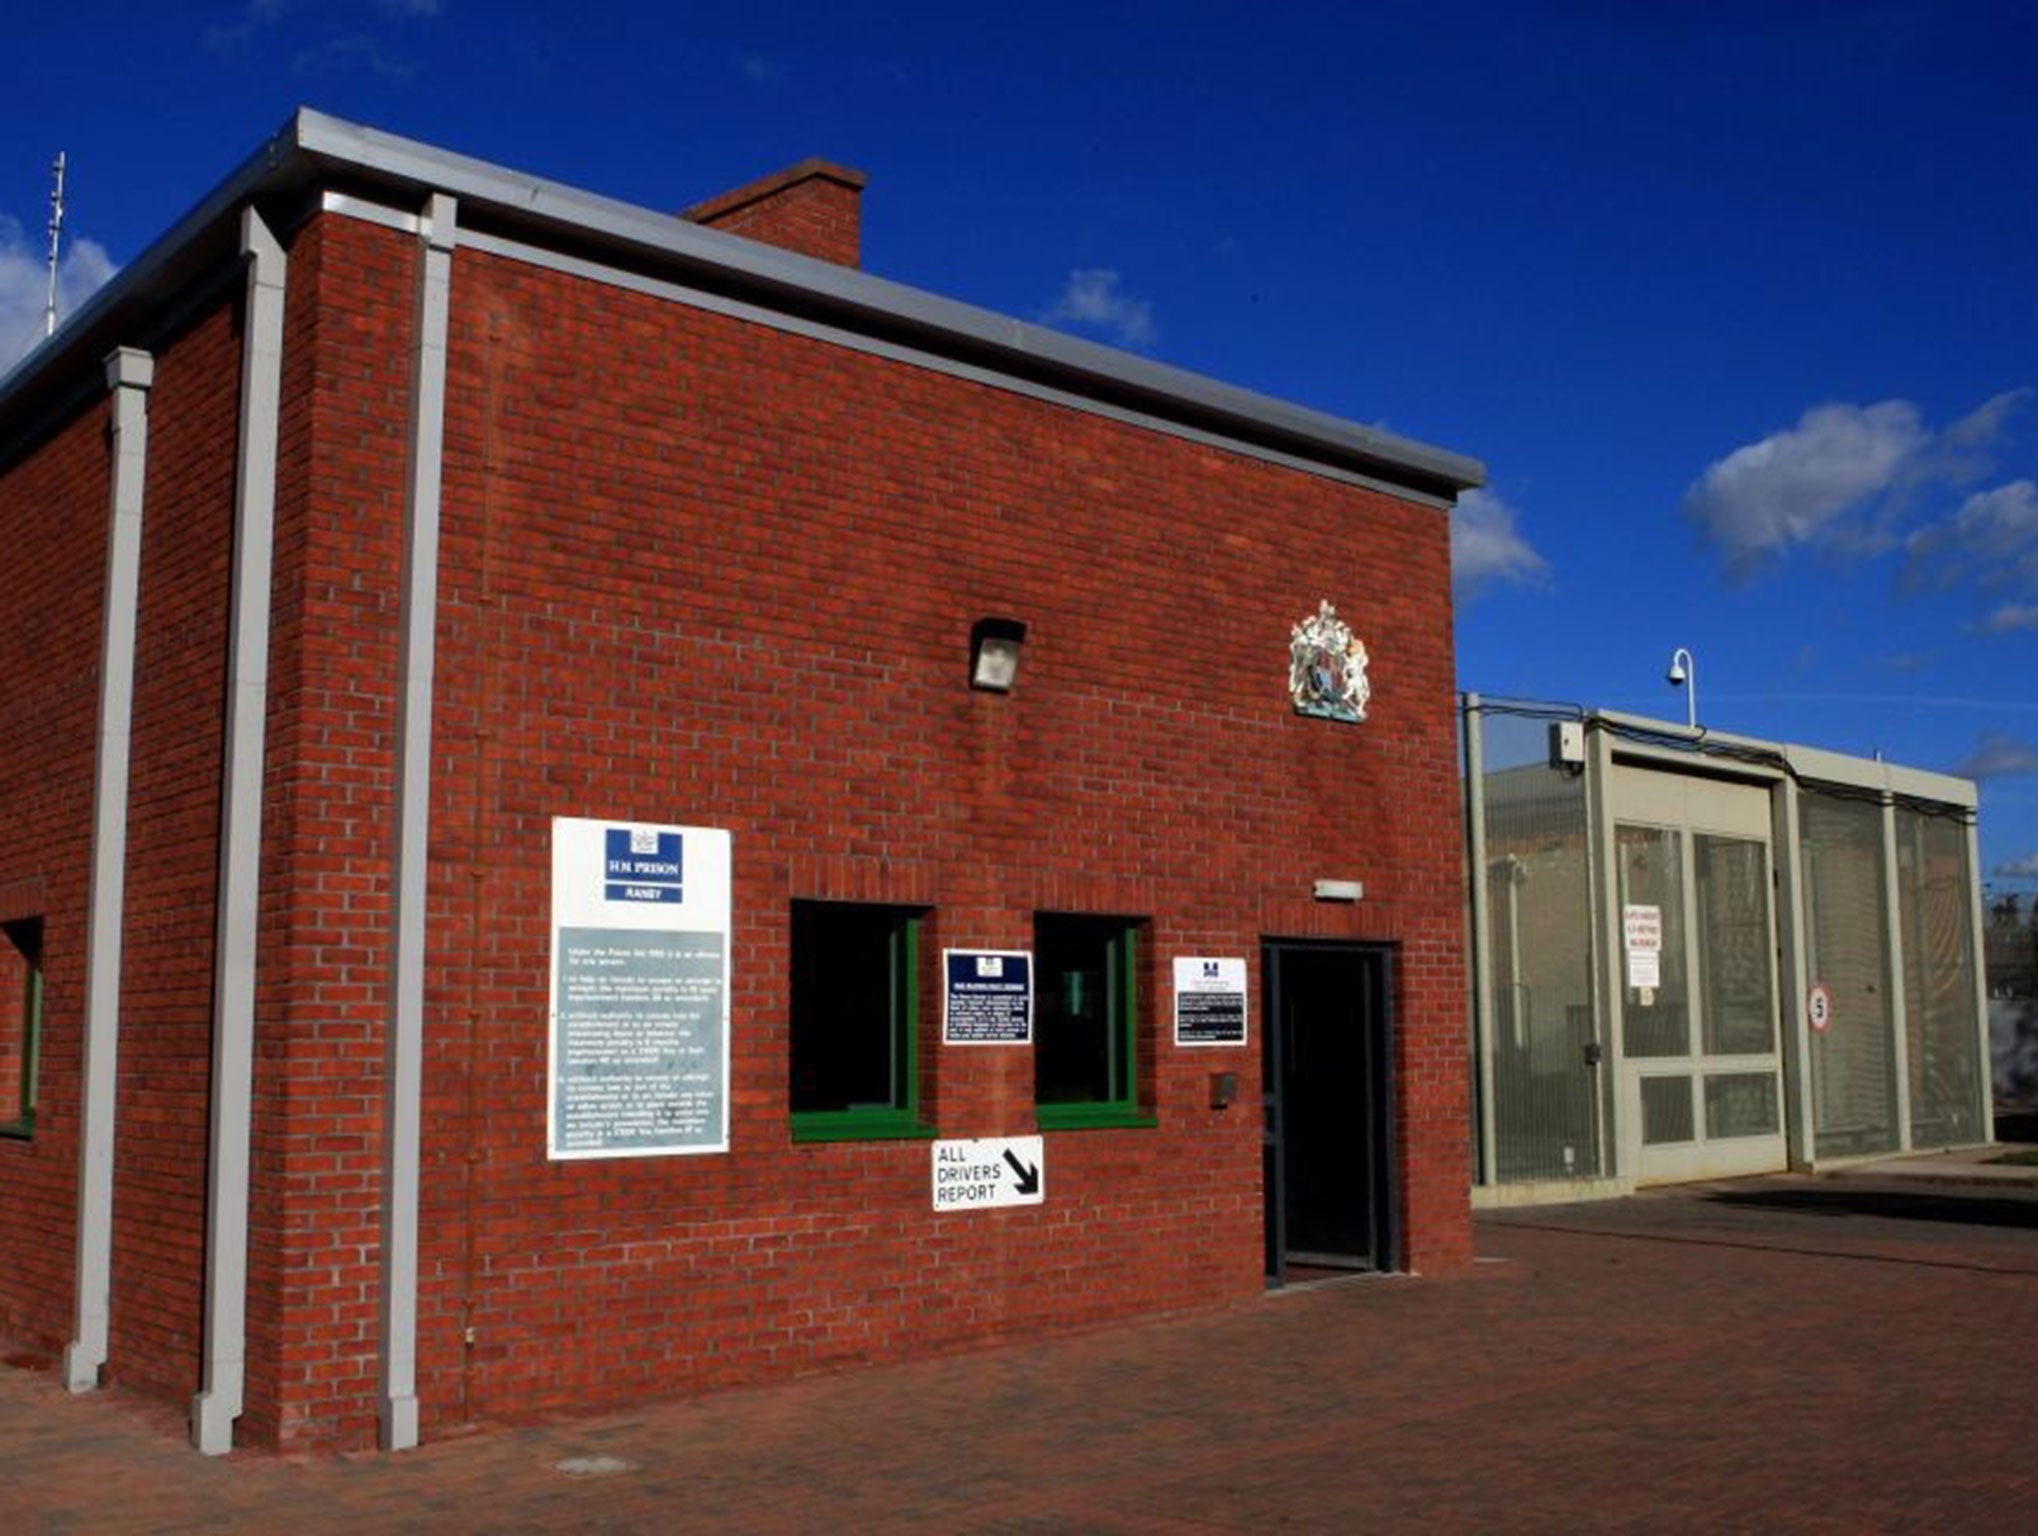 Chief Inspector of Prisons Nick Hardwick said HMP Ranby was 'in crisis' after the publication of a report on Thursday which described the prison as unsafe with high levels of violence